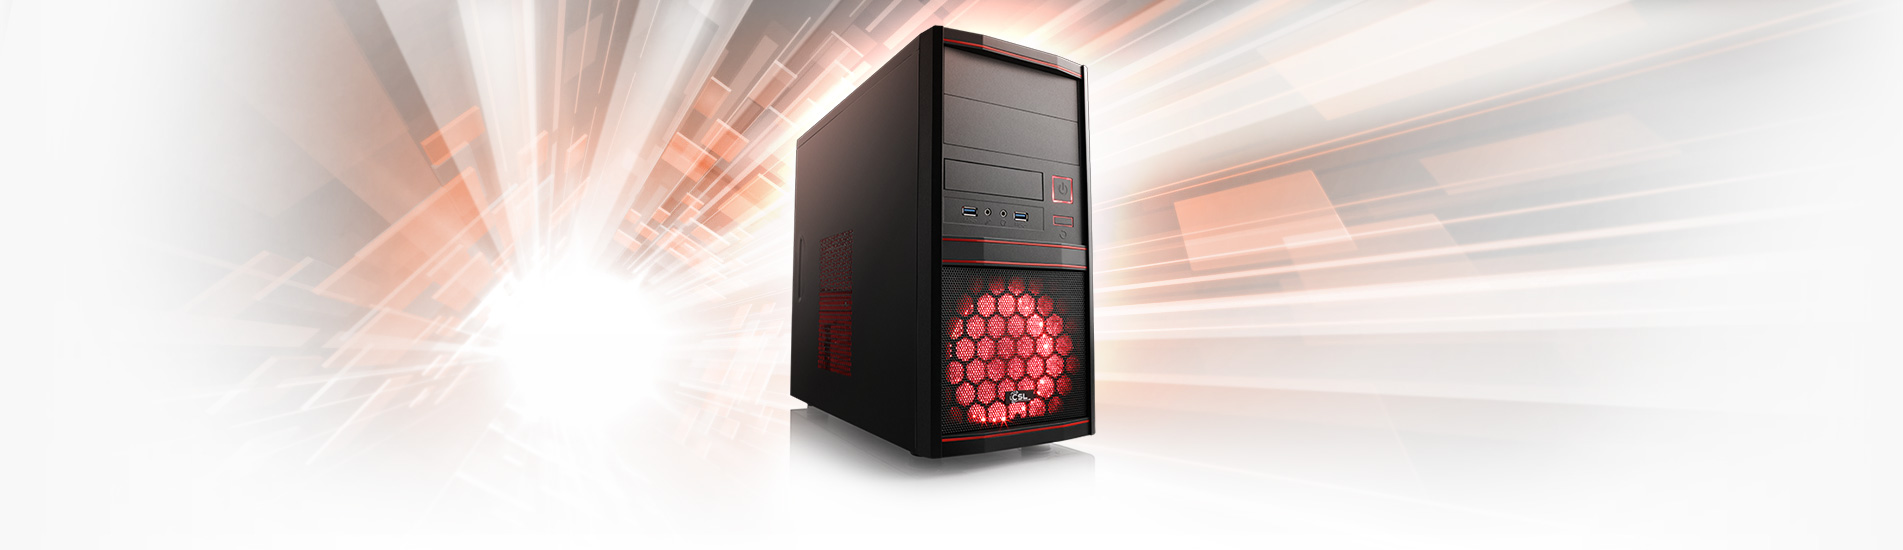 A powerful all-round PC with Ryzen™ 5 PRO 4650G processor for office, multimedia and entry-level gaming.